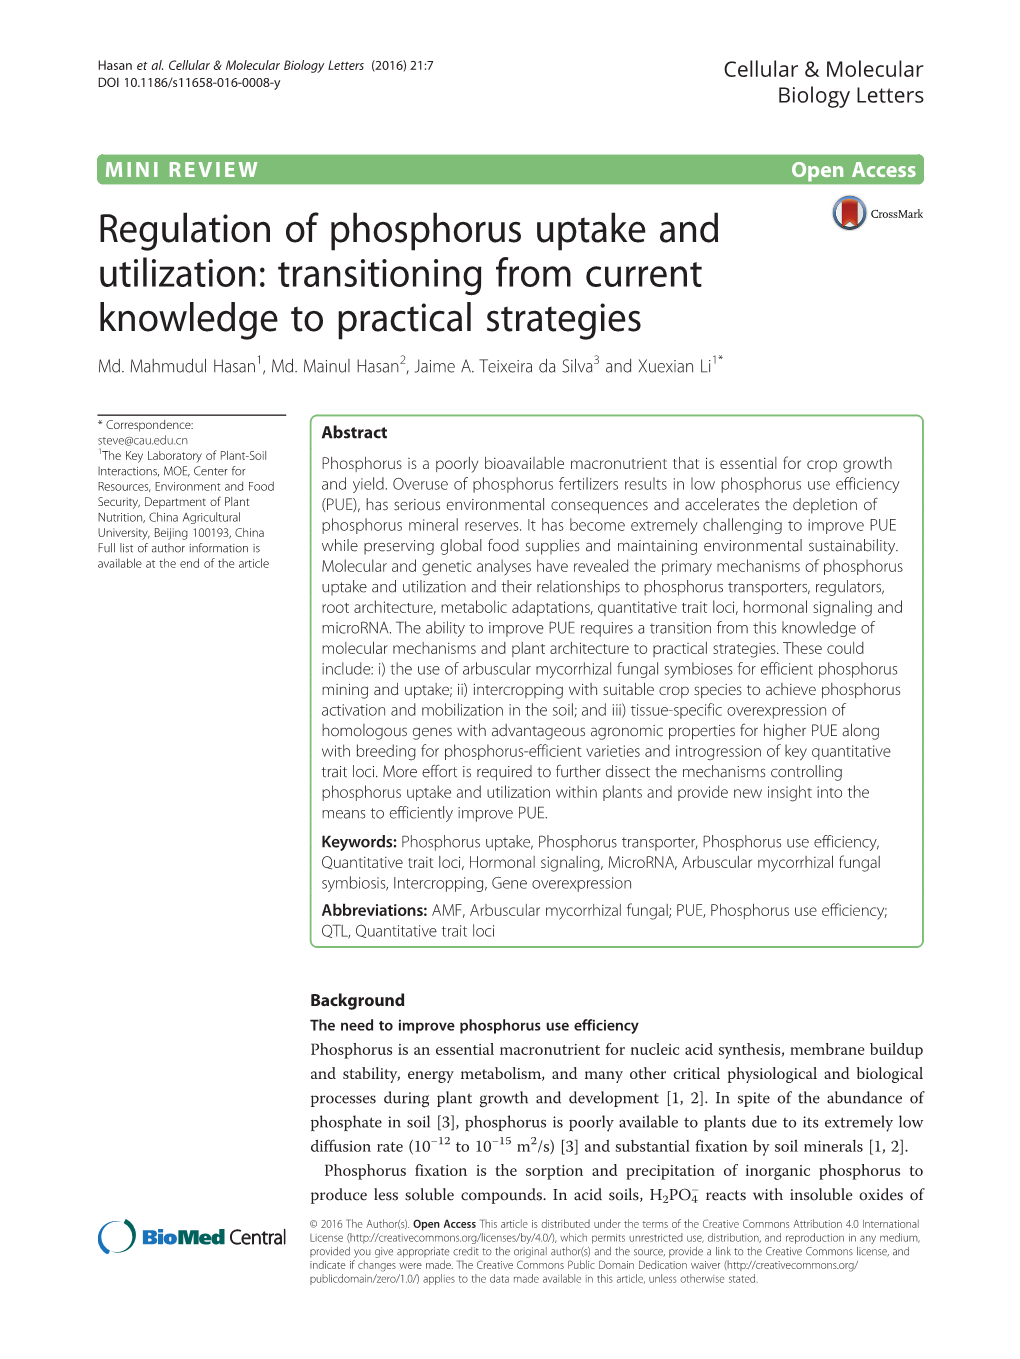 Regulation of Phosphorus Uptake and Utilization: Transitioning from Current Knowledge to Practical Strategies Md